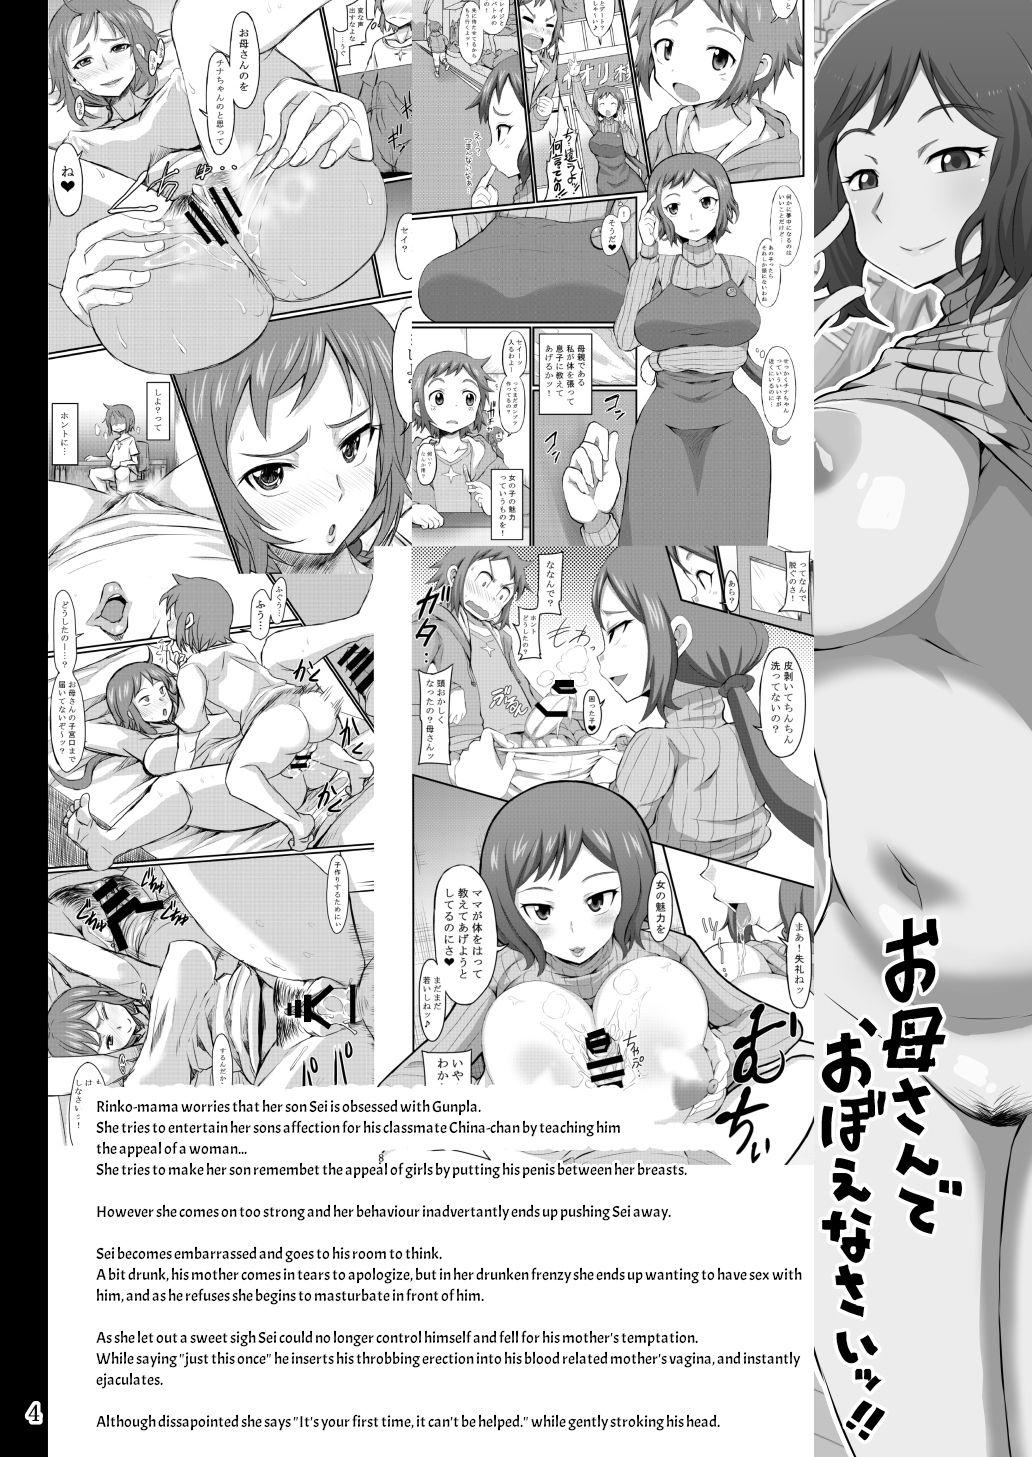 Stranger Okaa-san to Hagukumimasho | Let's grow up with mother - Gundam build fighters Porn Star - Page 3